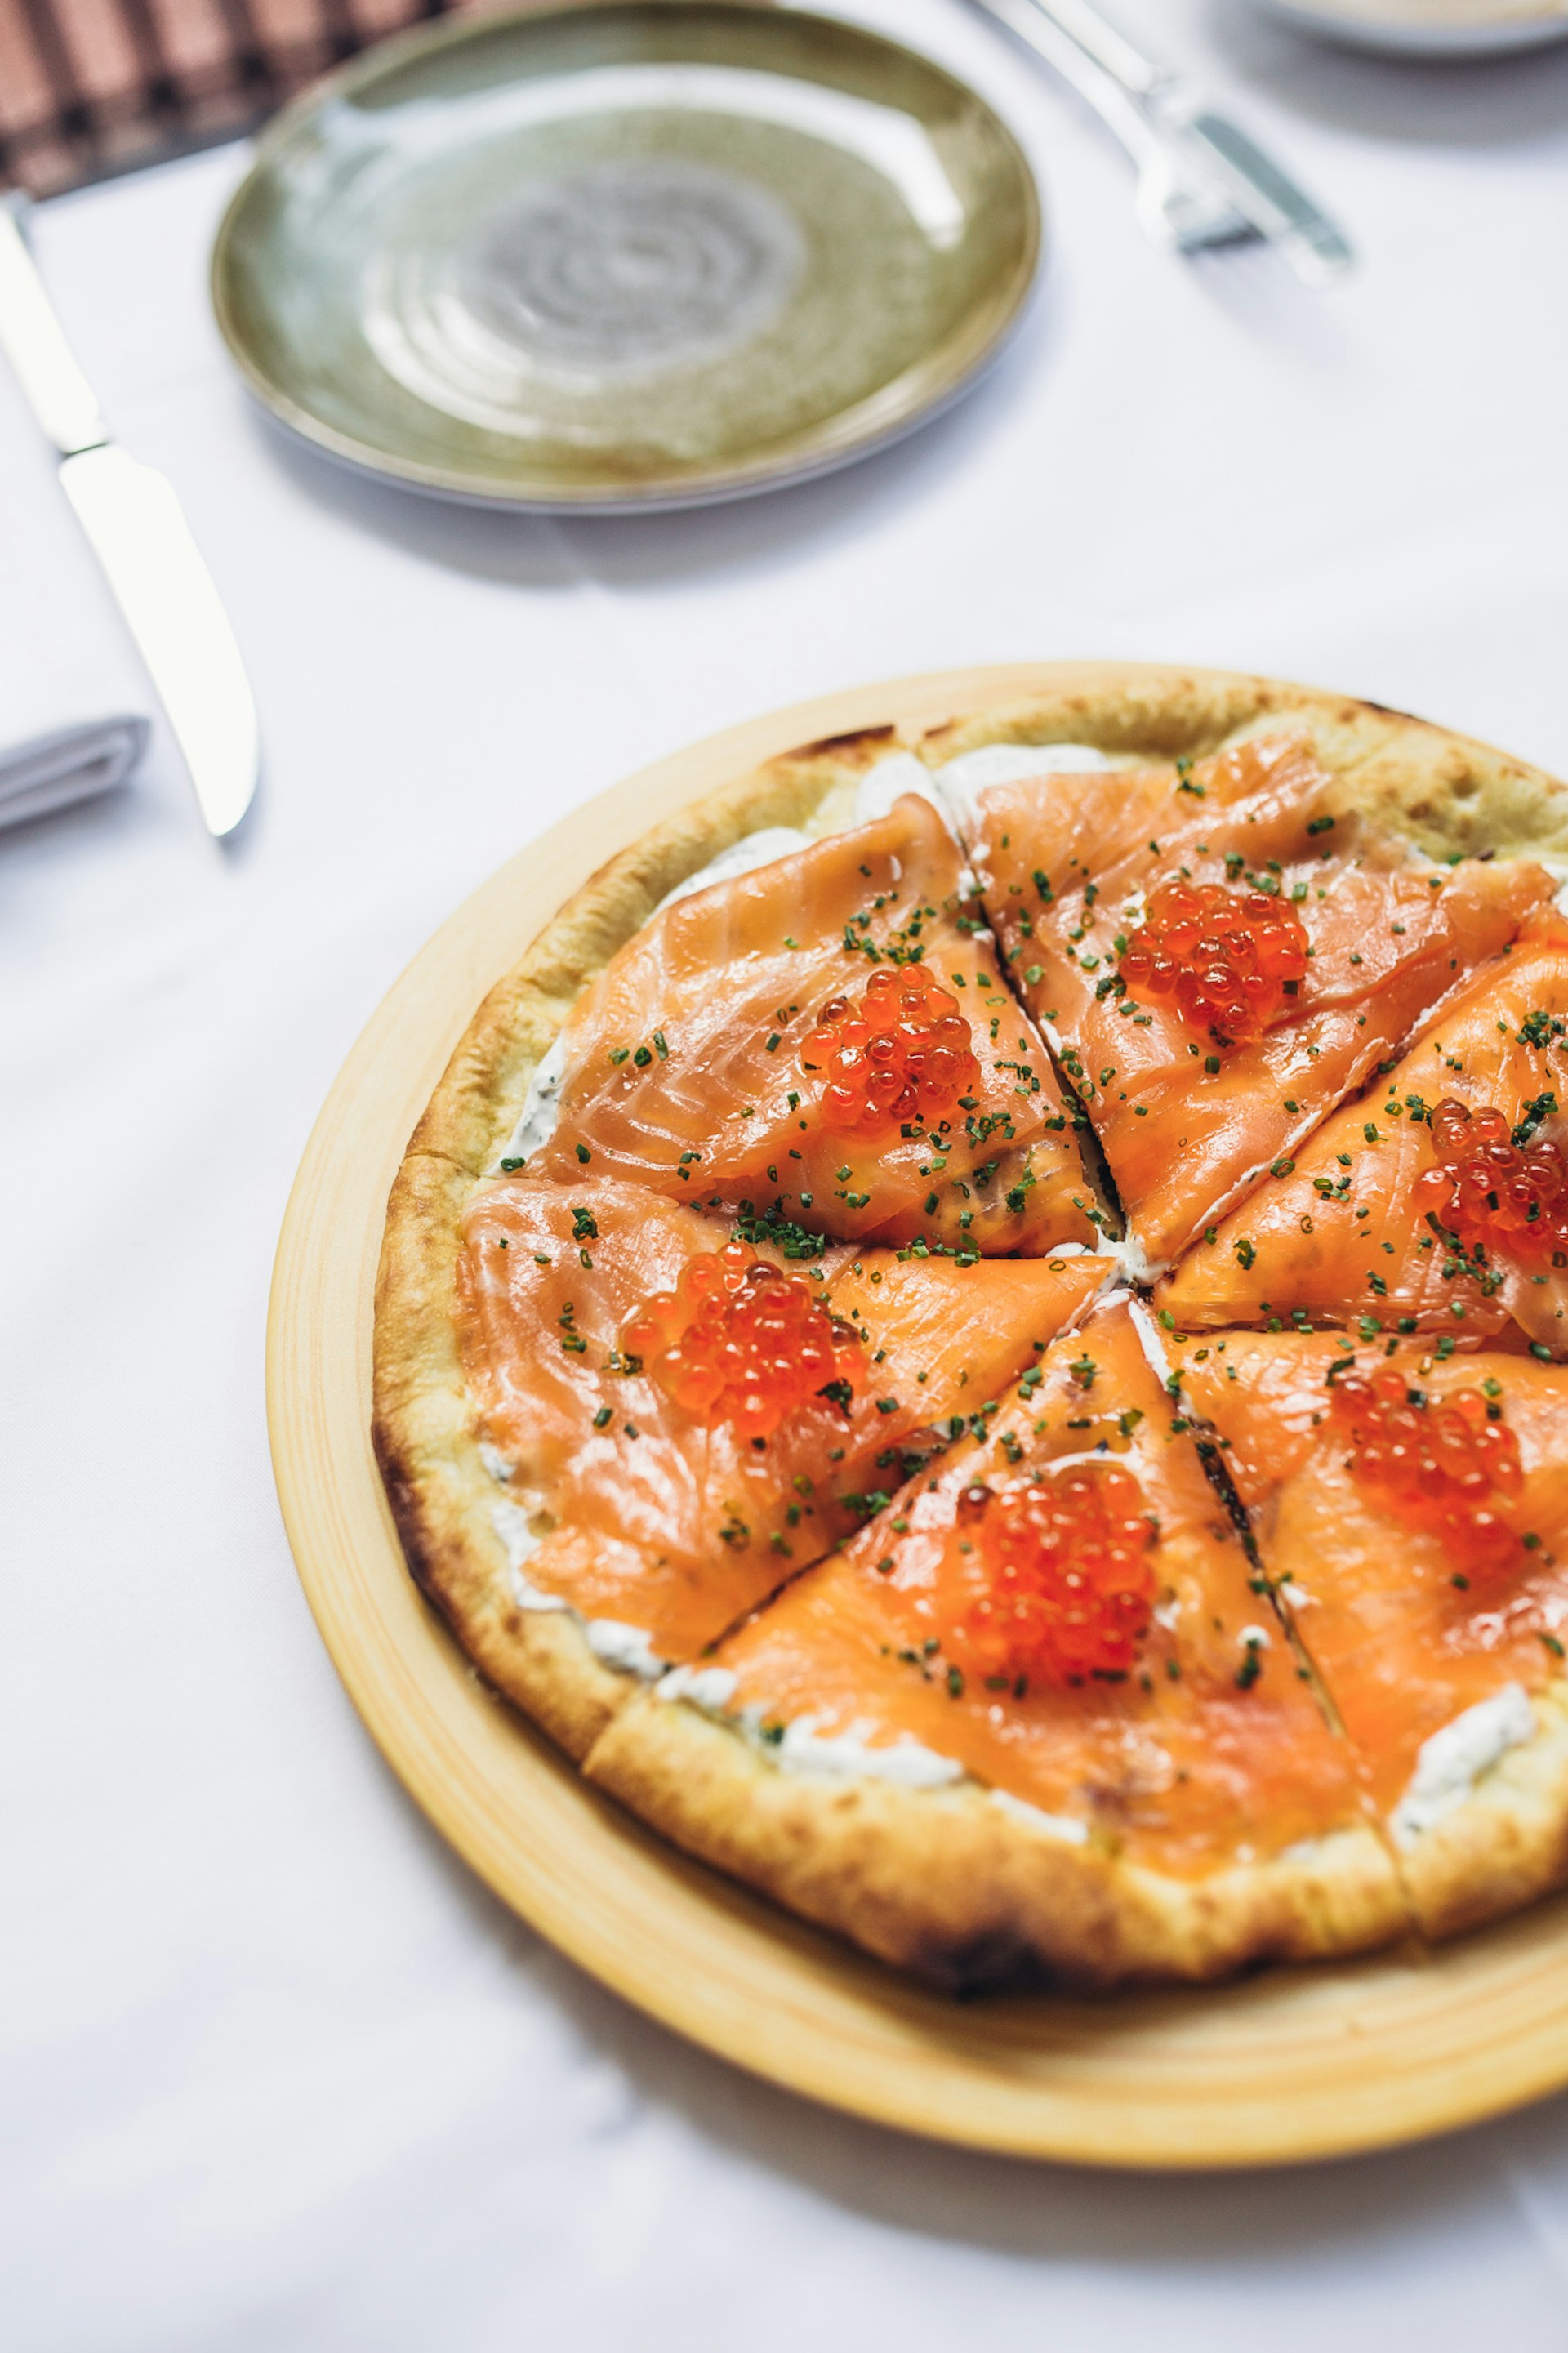 Spago in Los Angeles' smoked salmon pizza with salmon roe 